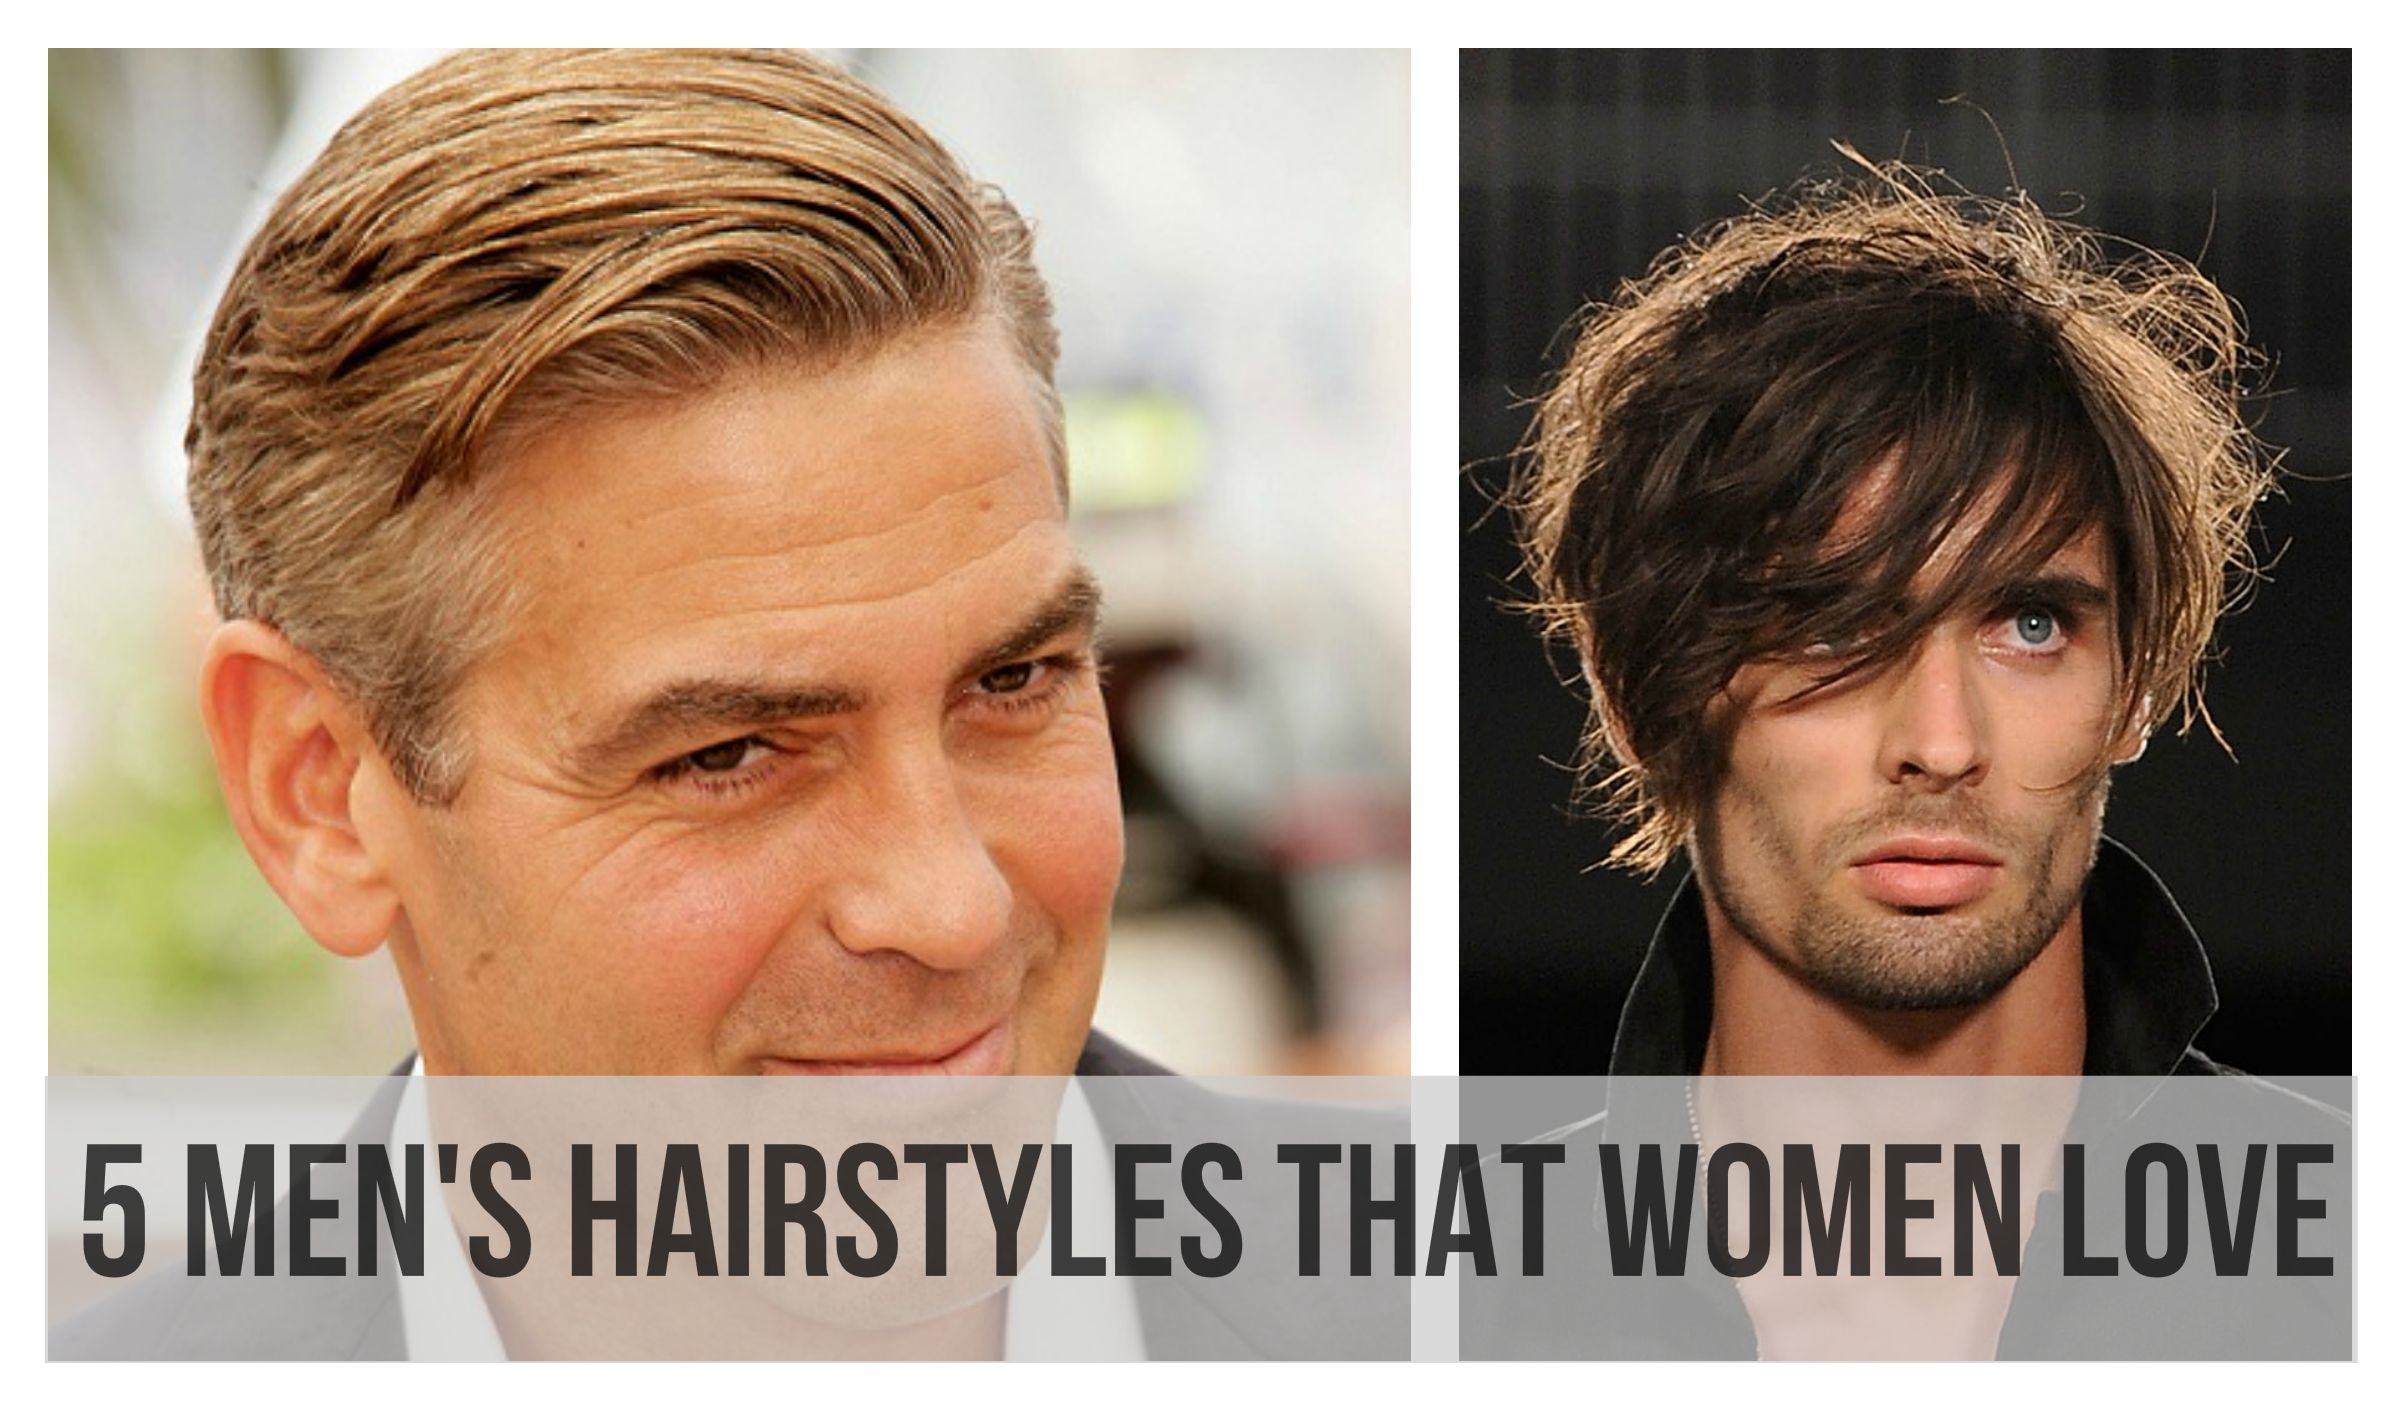 Mens Hairstyles Women Love
 5 Men’s Hairstyles that Women Love 2 is Our Favorite